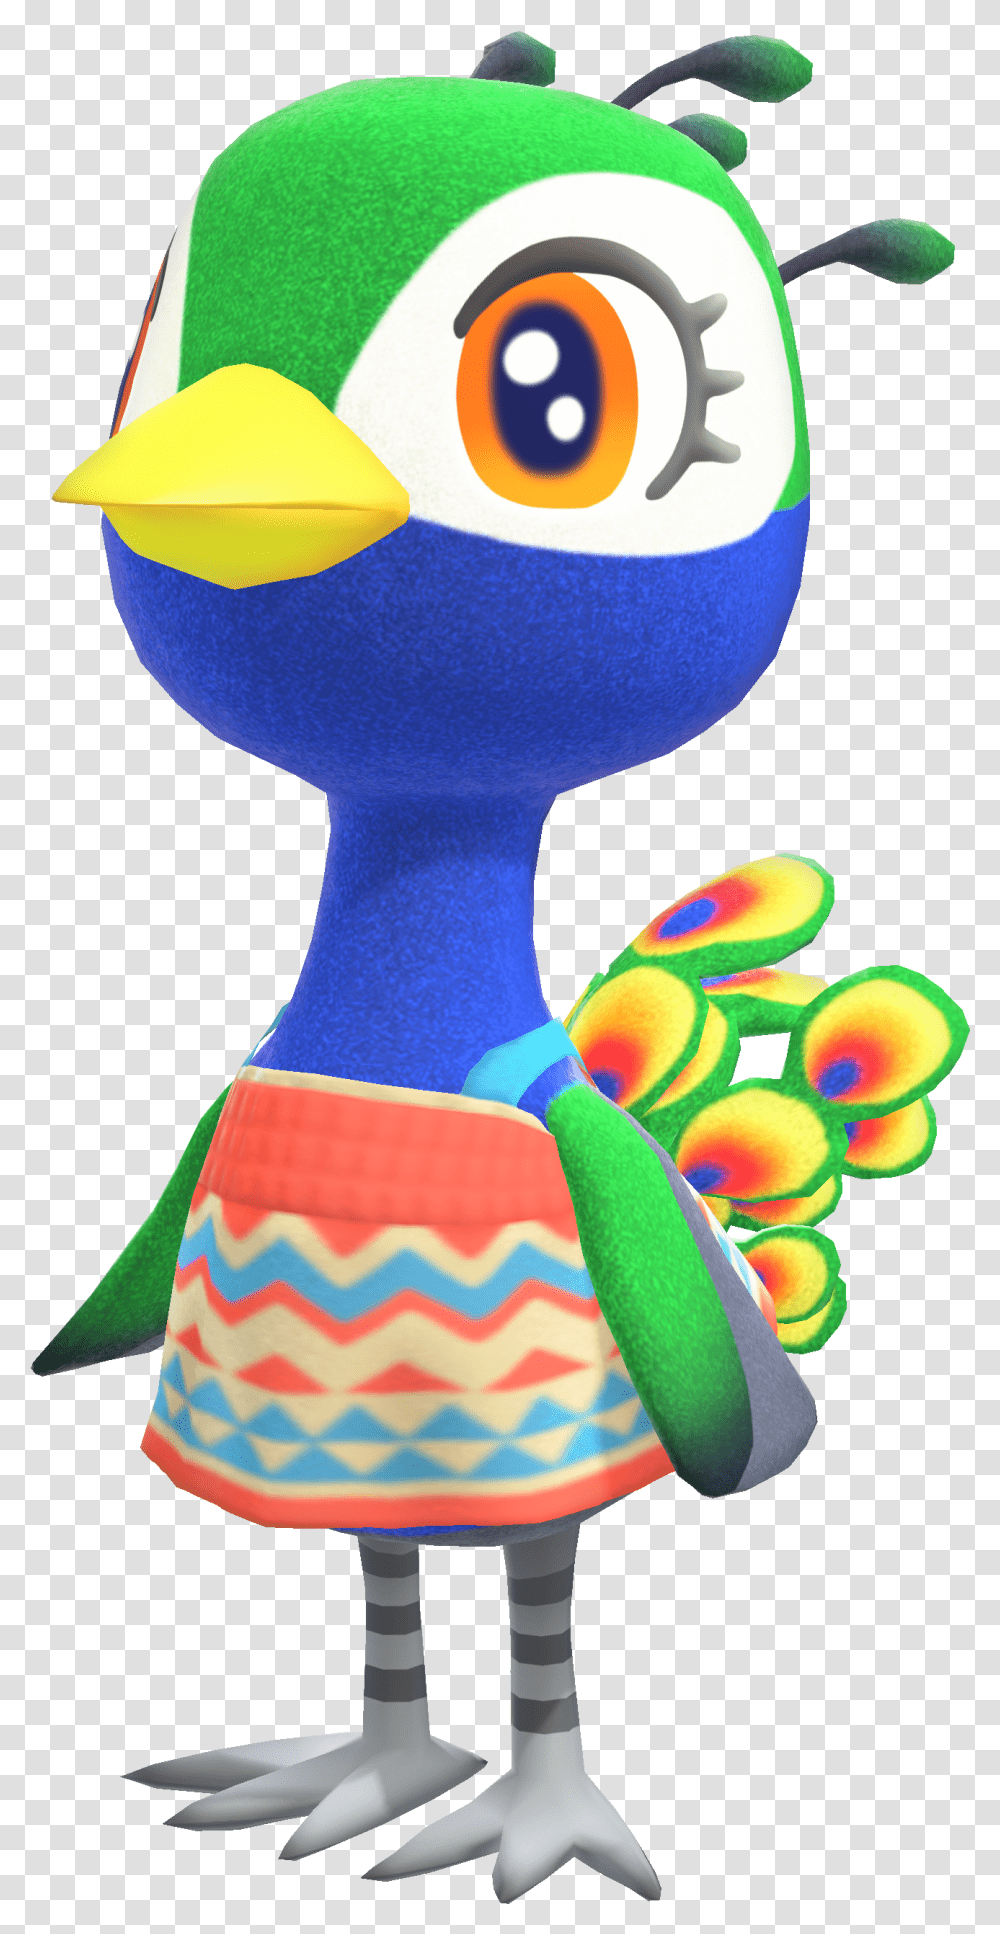 Julia Animal Crossing Item And Villager Database Villagerdb Peacock Animal Crossing New Horizons, Toy, Glass, Goblet, Rattle Transparent Png